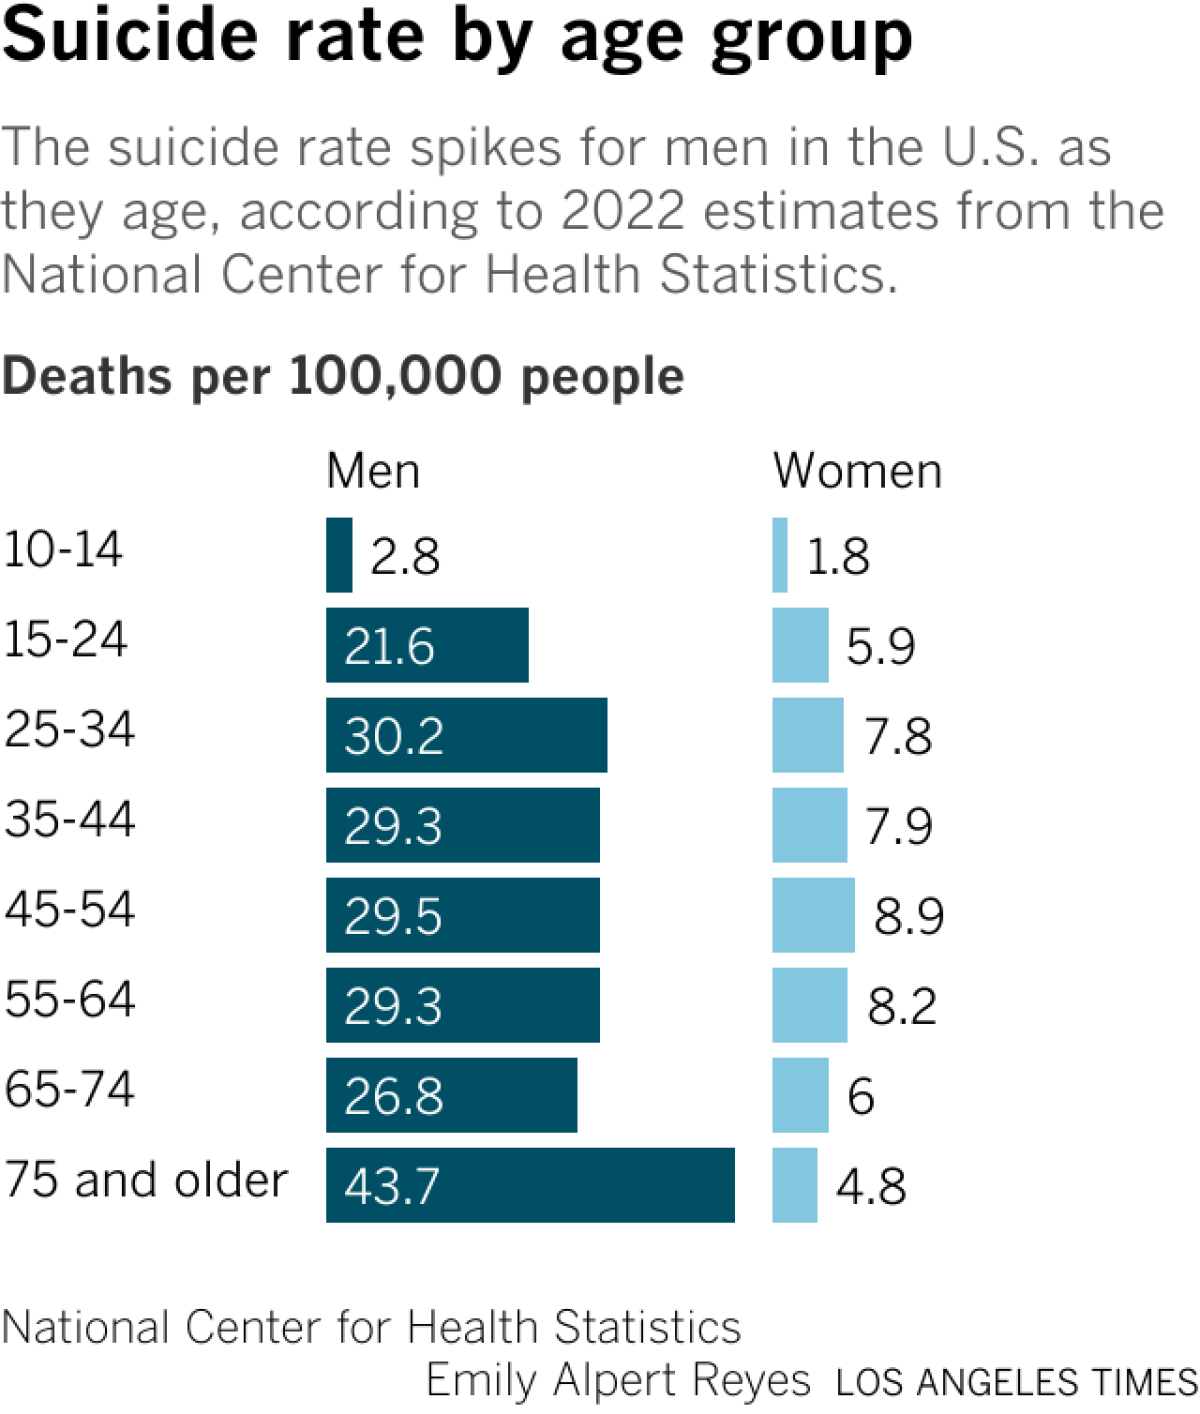 The suicide rate spikes for men in the U.S. as they age, according to 2022 estimates from the National Center for Health Statistics.